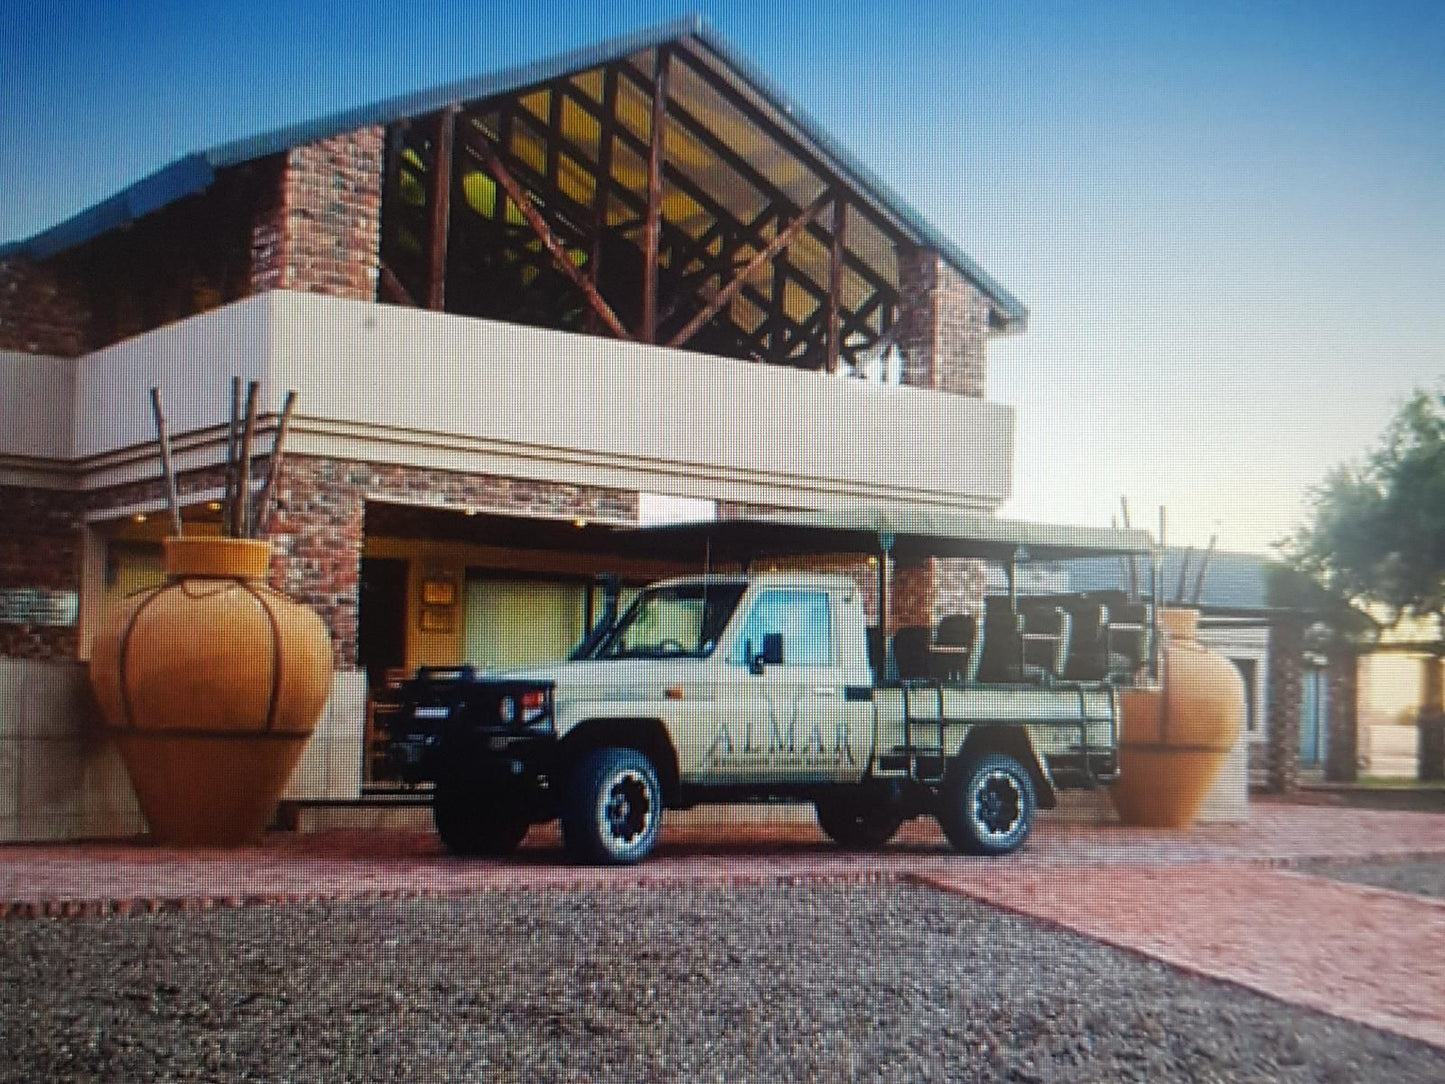 Almar Exclusive Game Ranch Bloemhof North West Province South Africa Building, Architecture